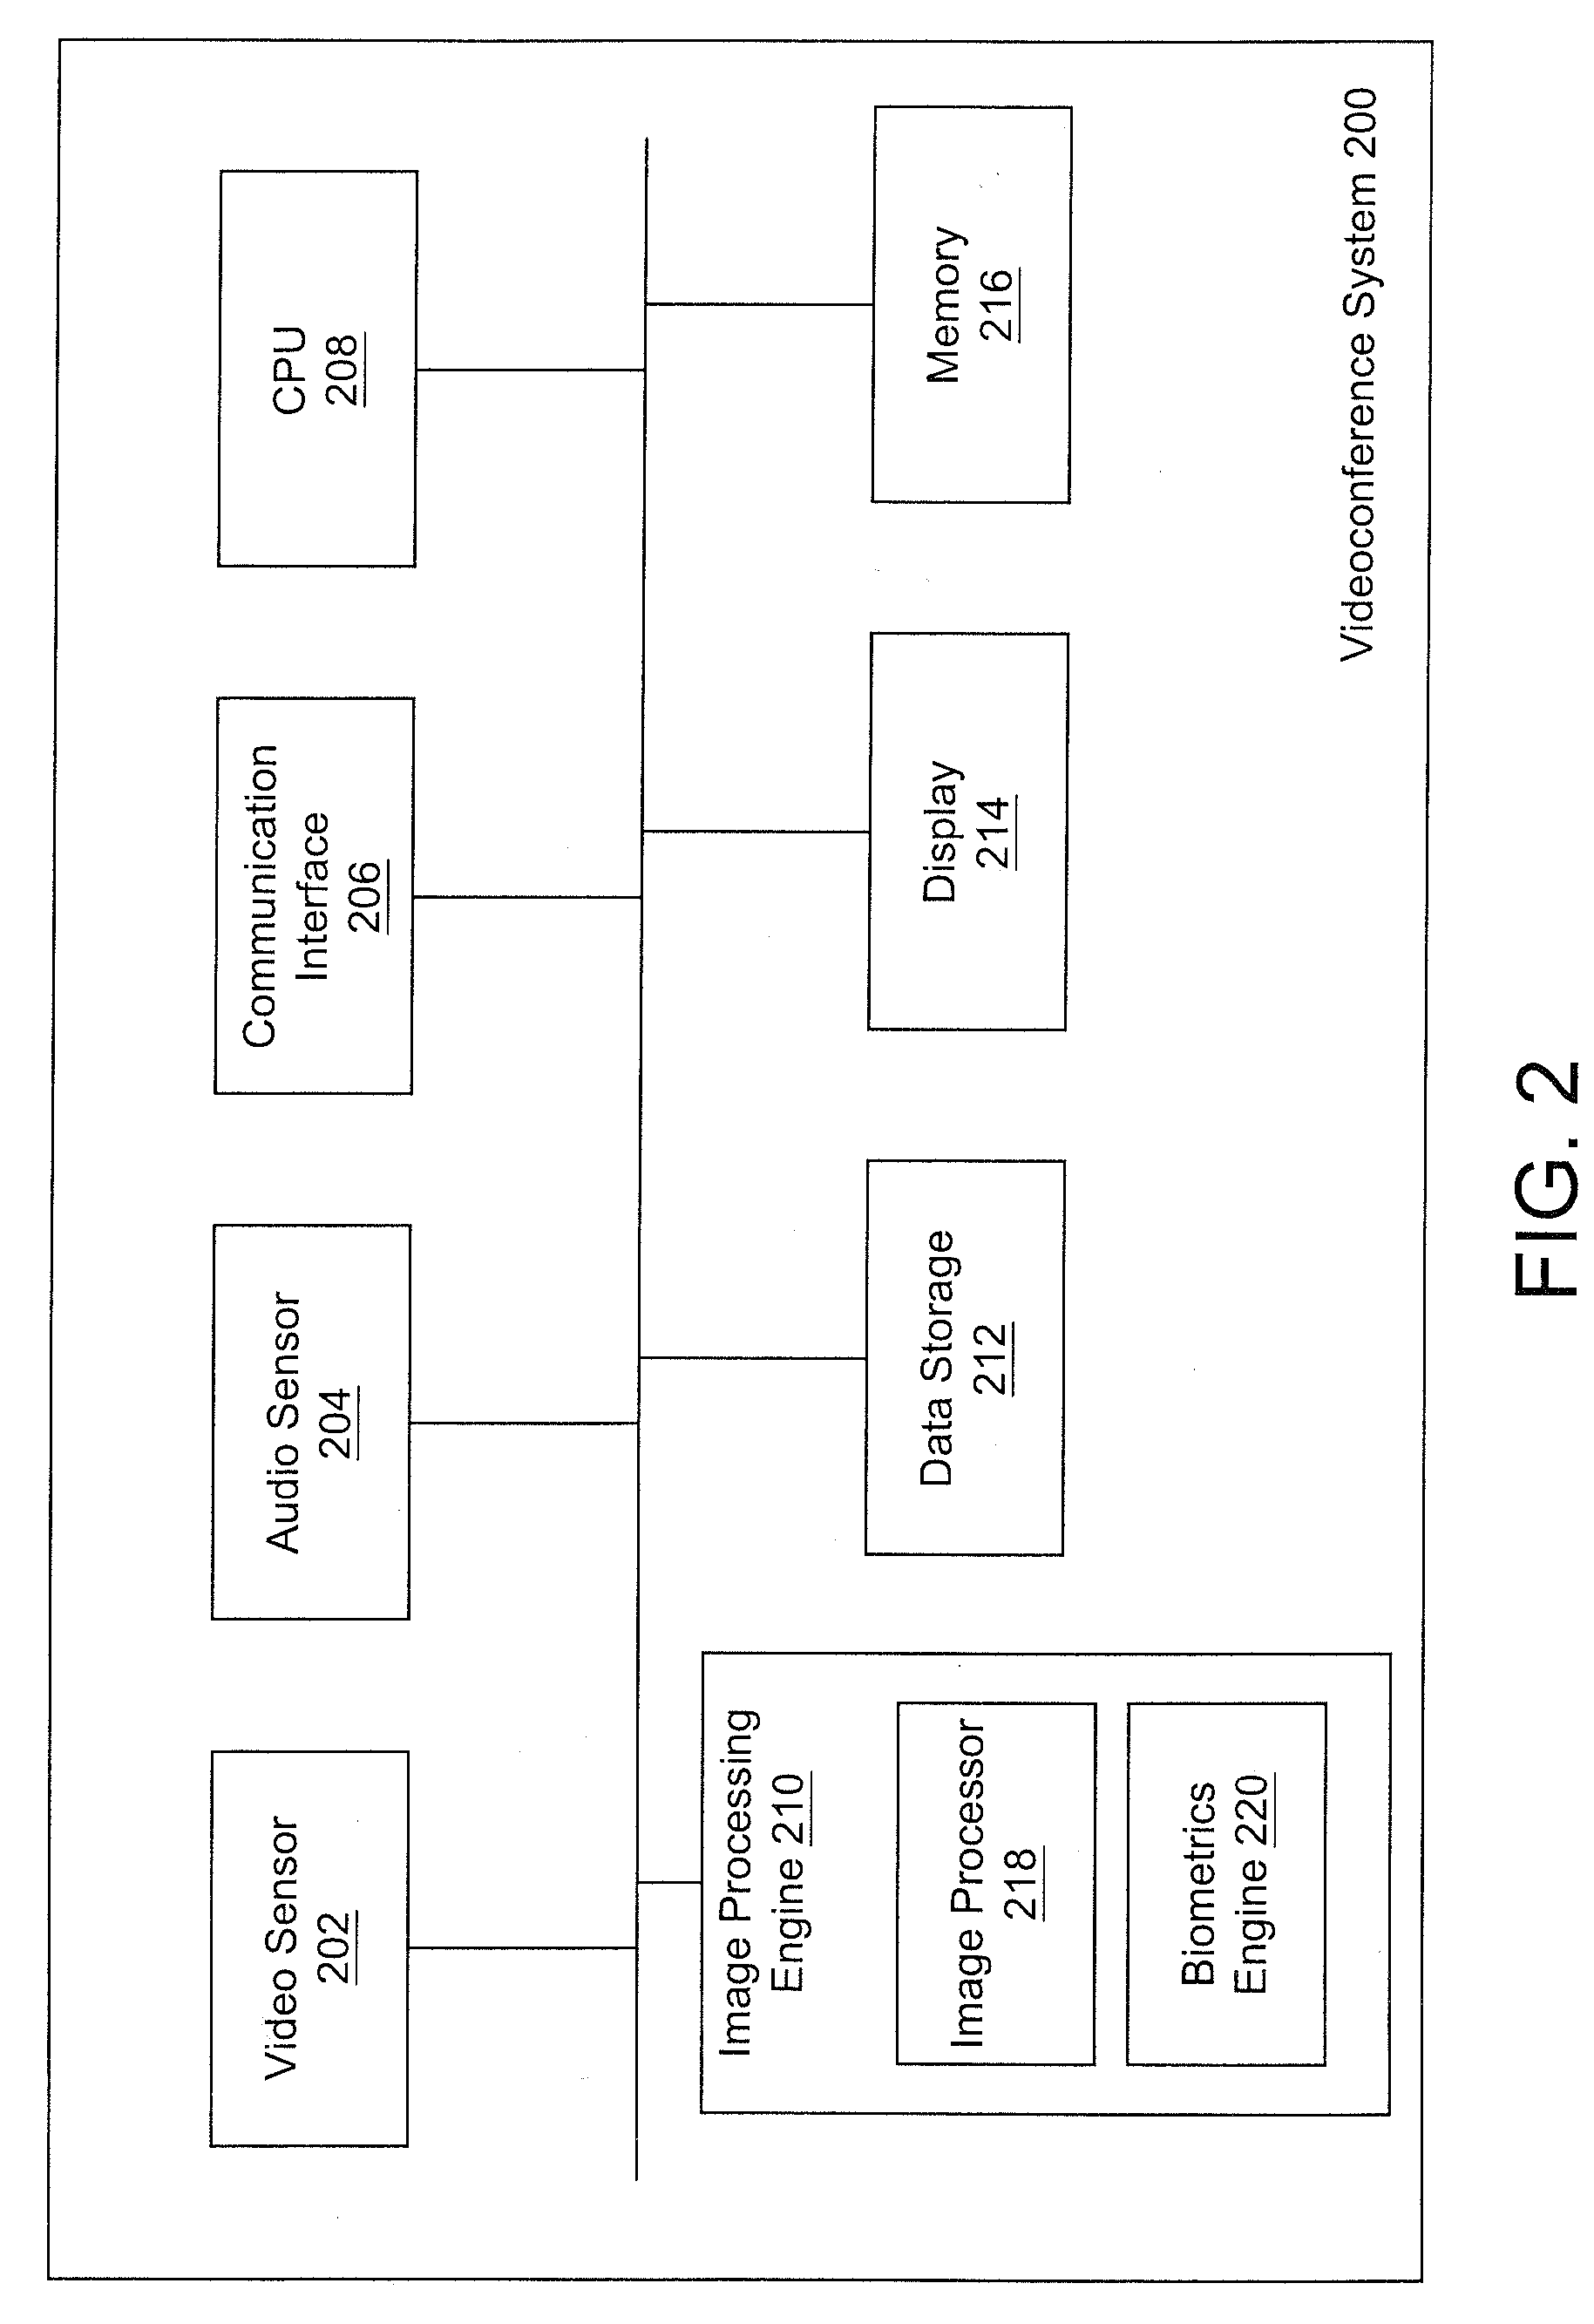 System and method for using biometrics technology in conferencing